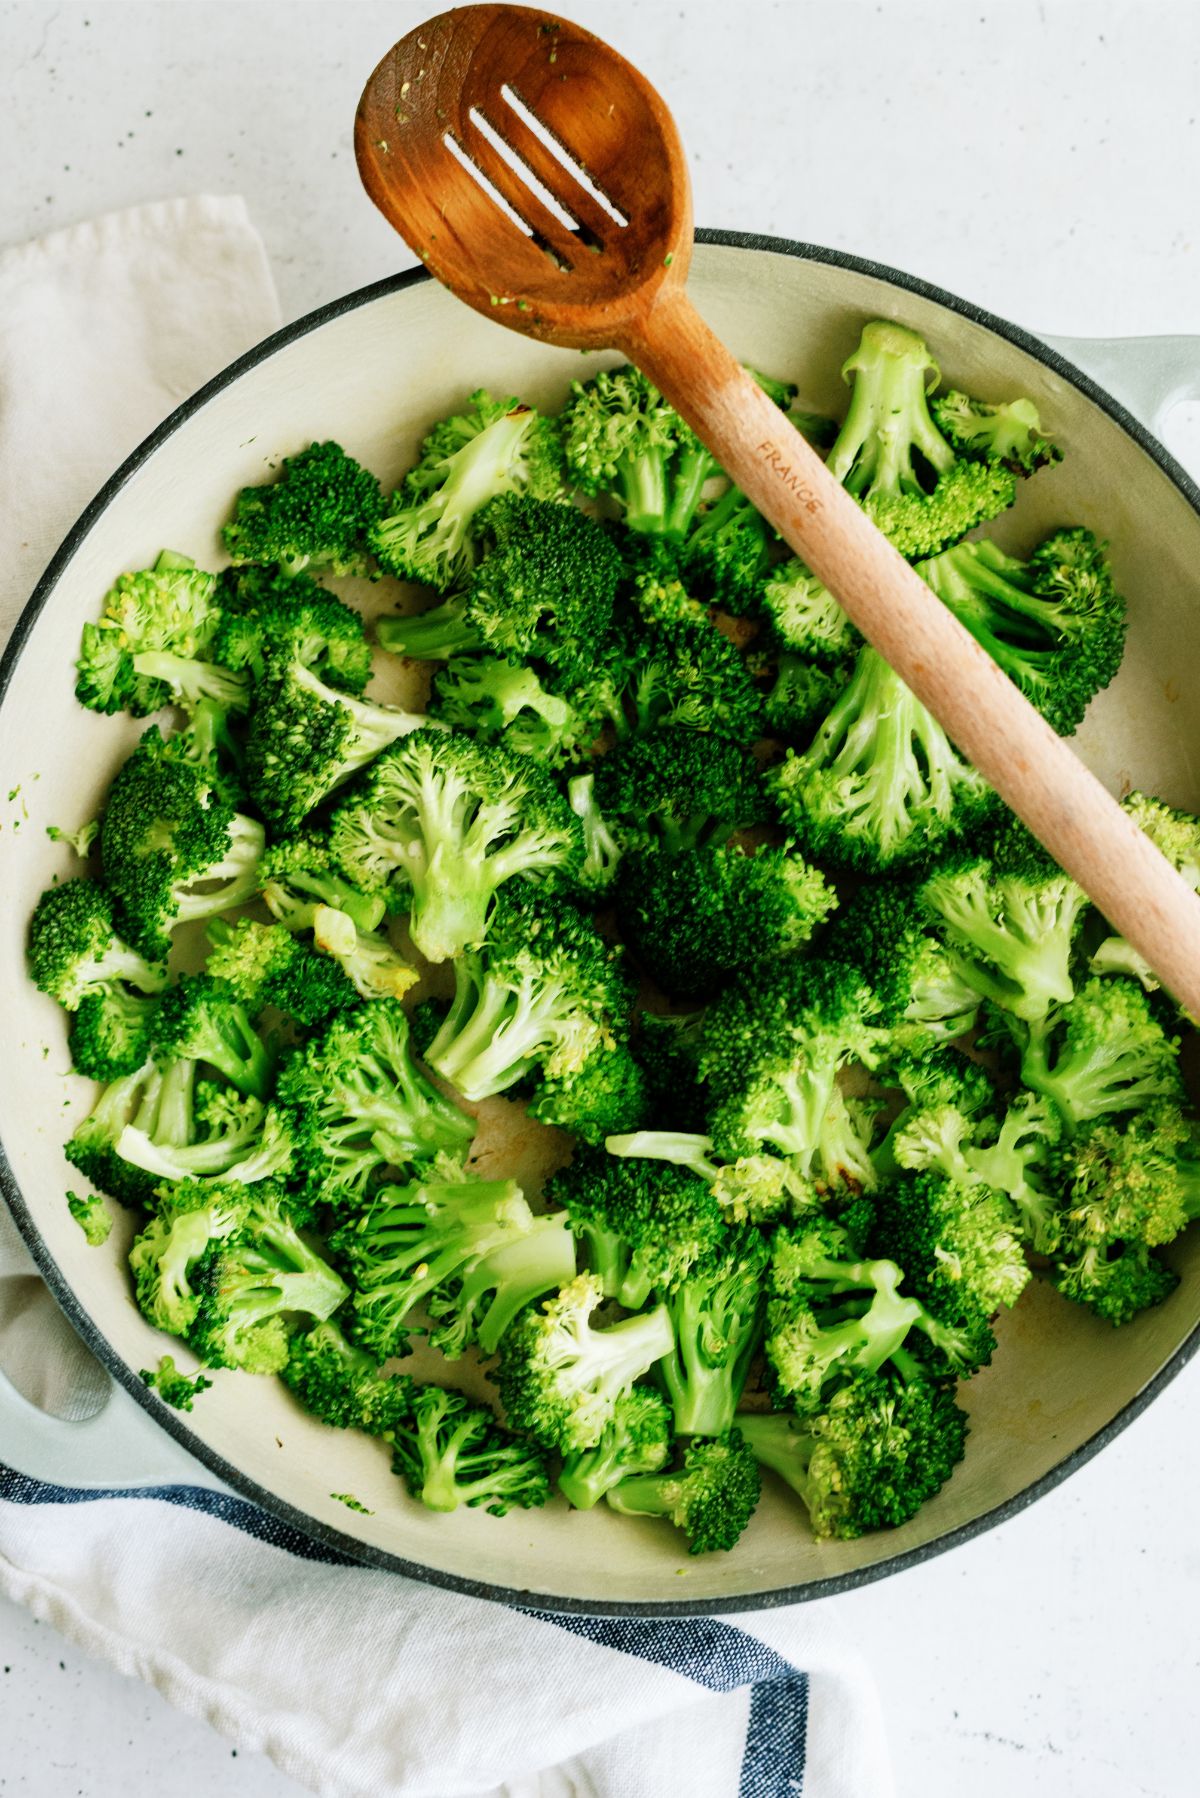 Sauteed broccoli in a pan with a wooden spoon